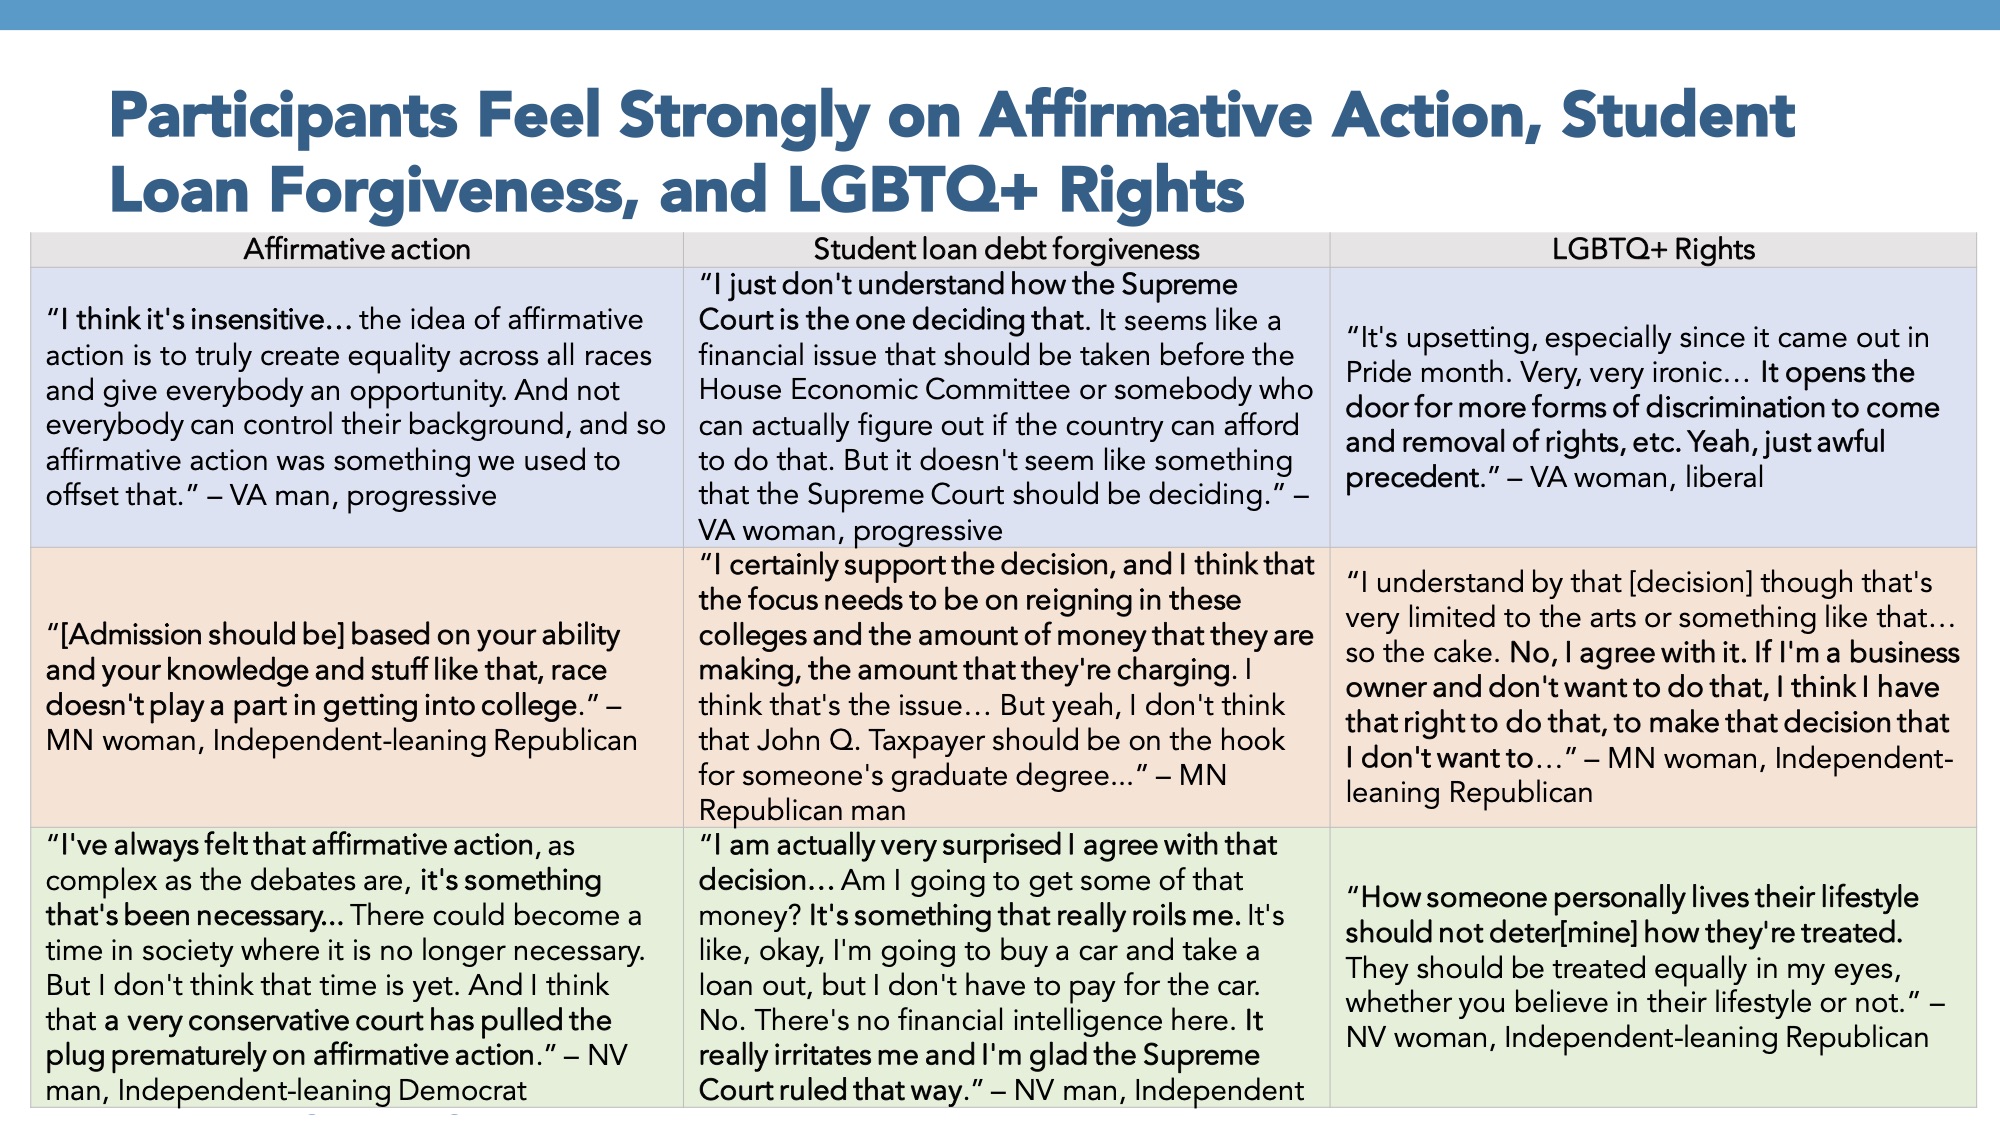 Report slide titled: Participants Feel Strongly on Affirmative Action, Student Loan Forgiveness, and LGBTQ+ Rights